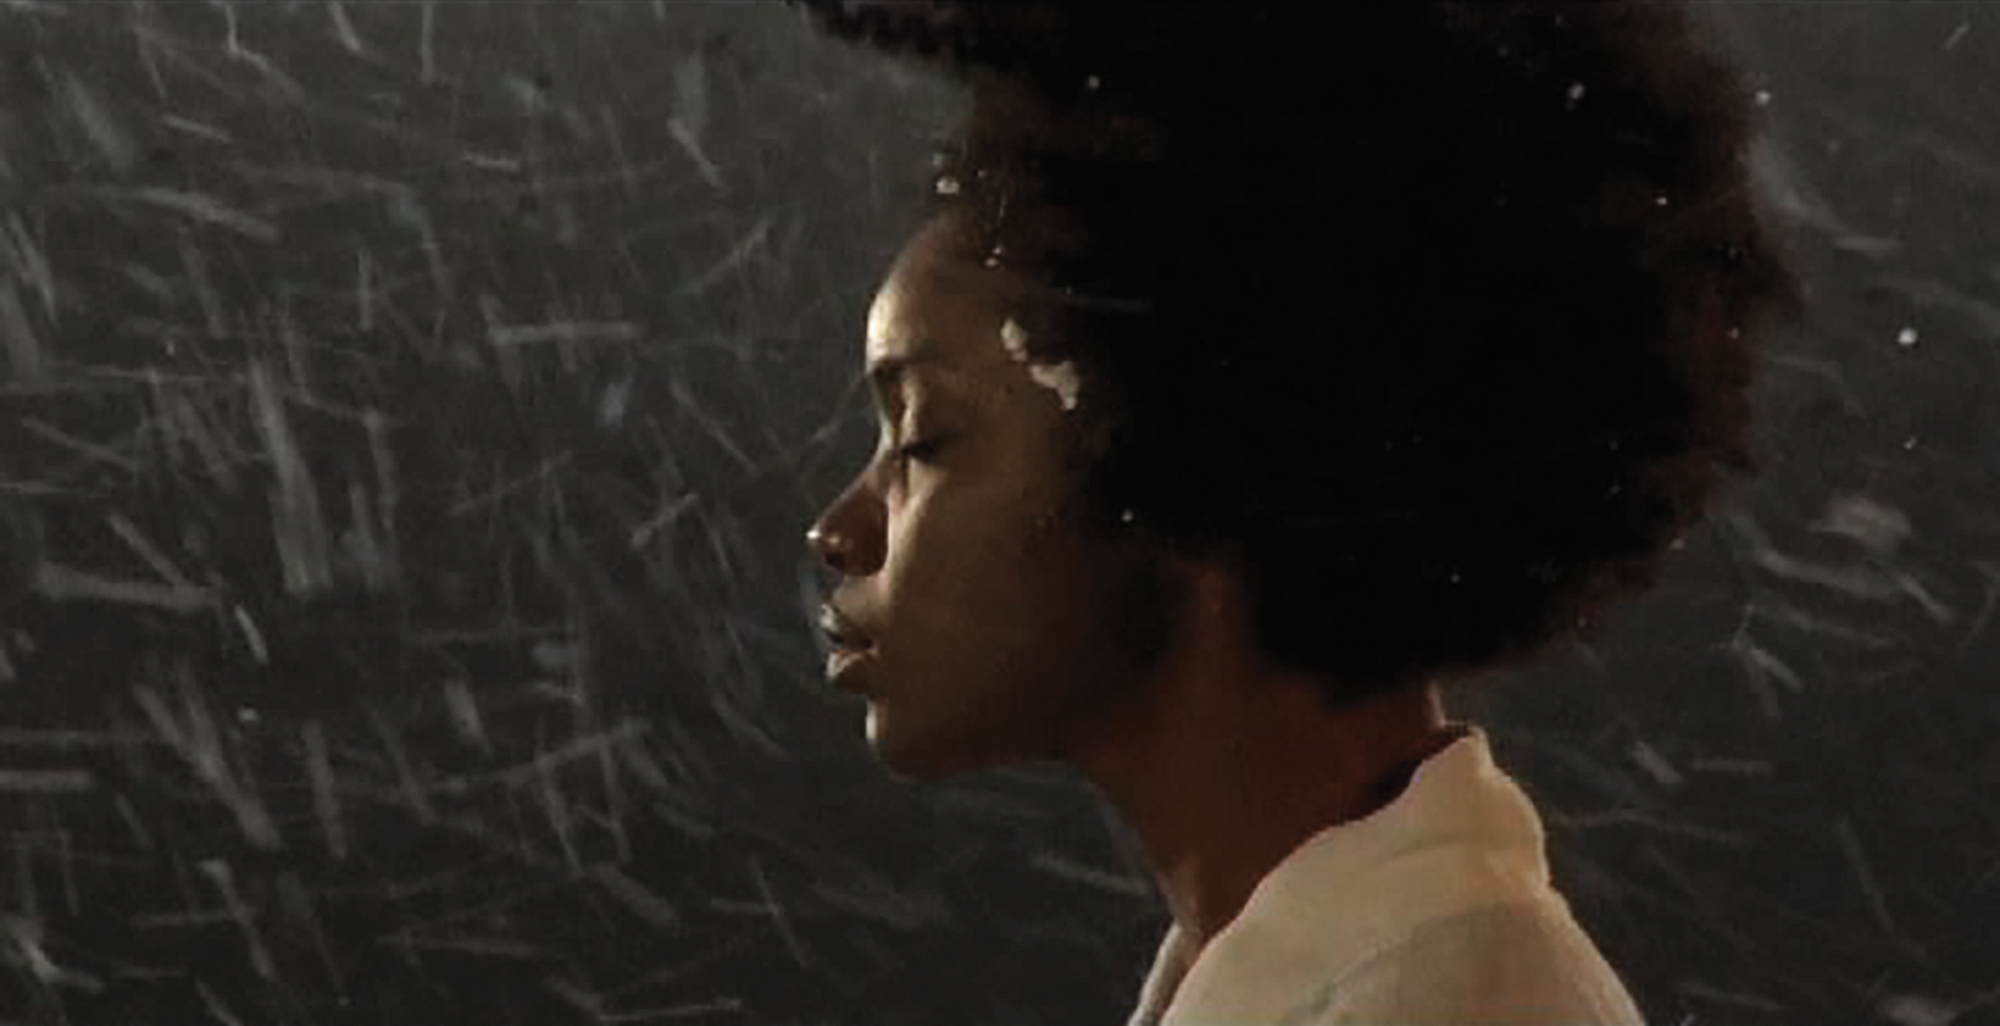     Carrie Mae Weems, Constructing History: A Requiem to Mark the Moment, 2008. Video still. Courtesy the artist and Jack Shainman Gallery, New York, NY.

